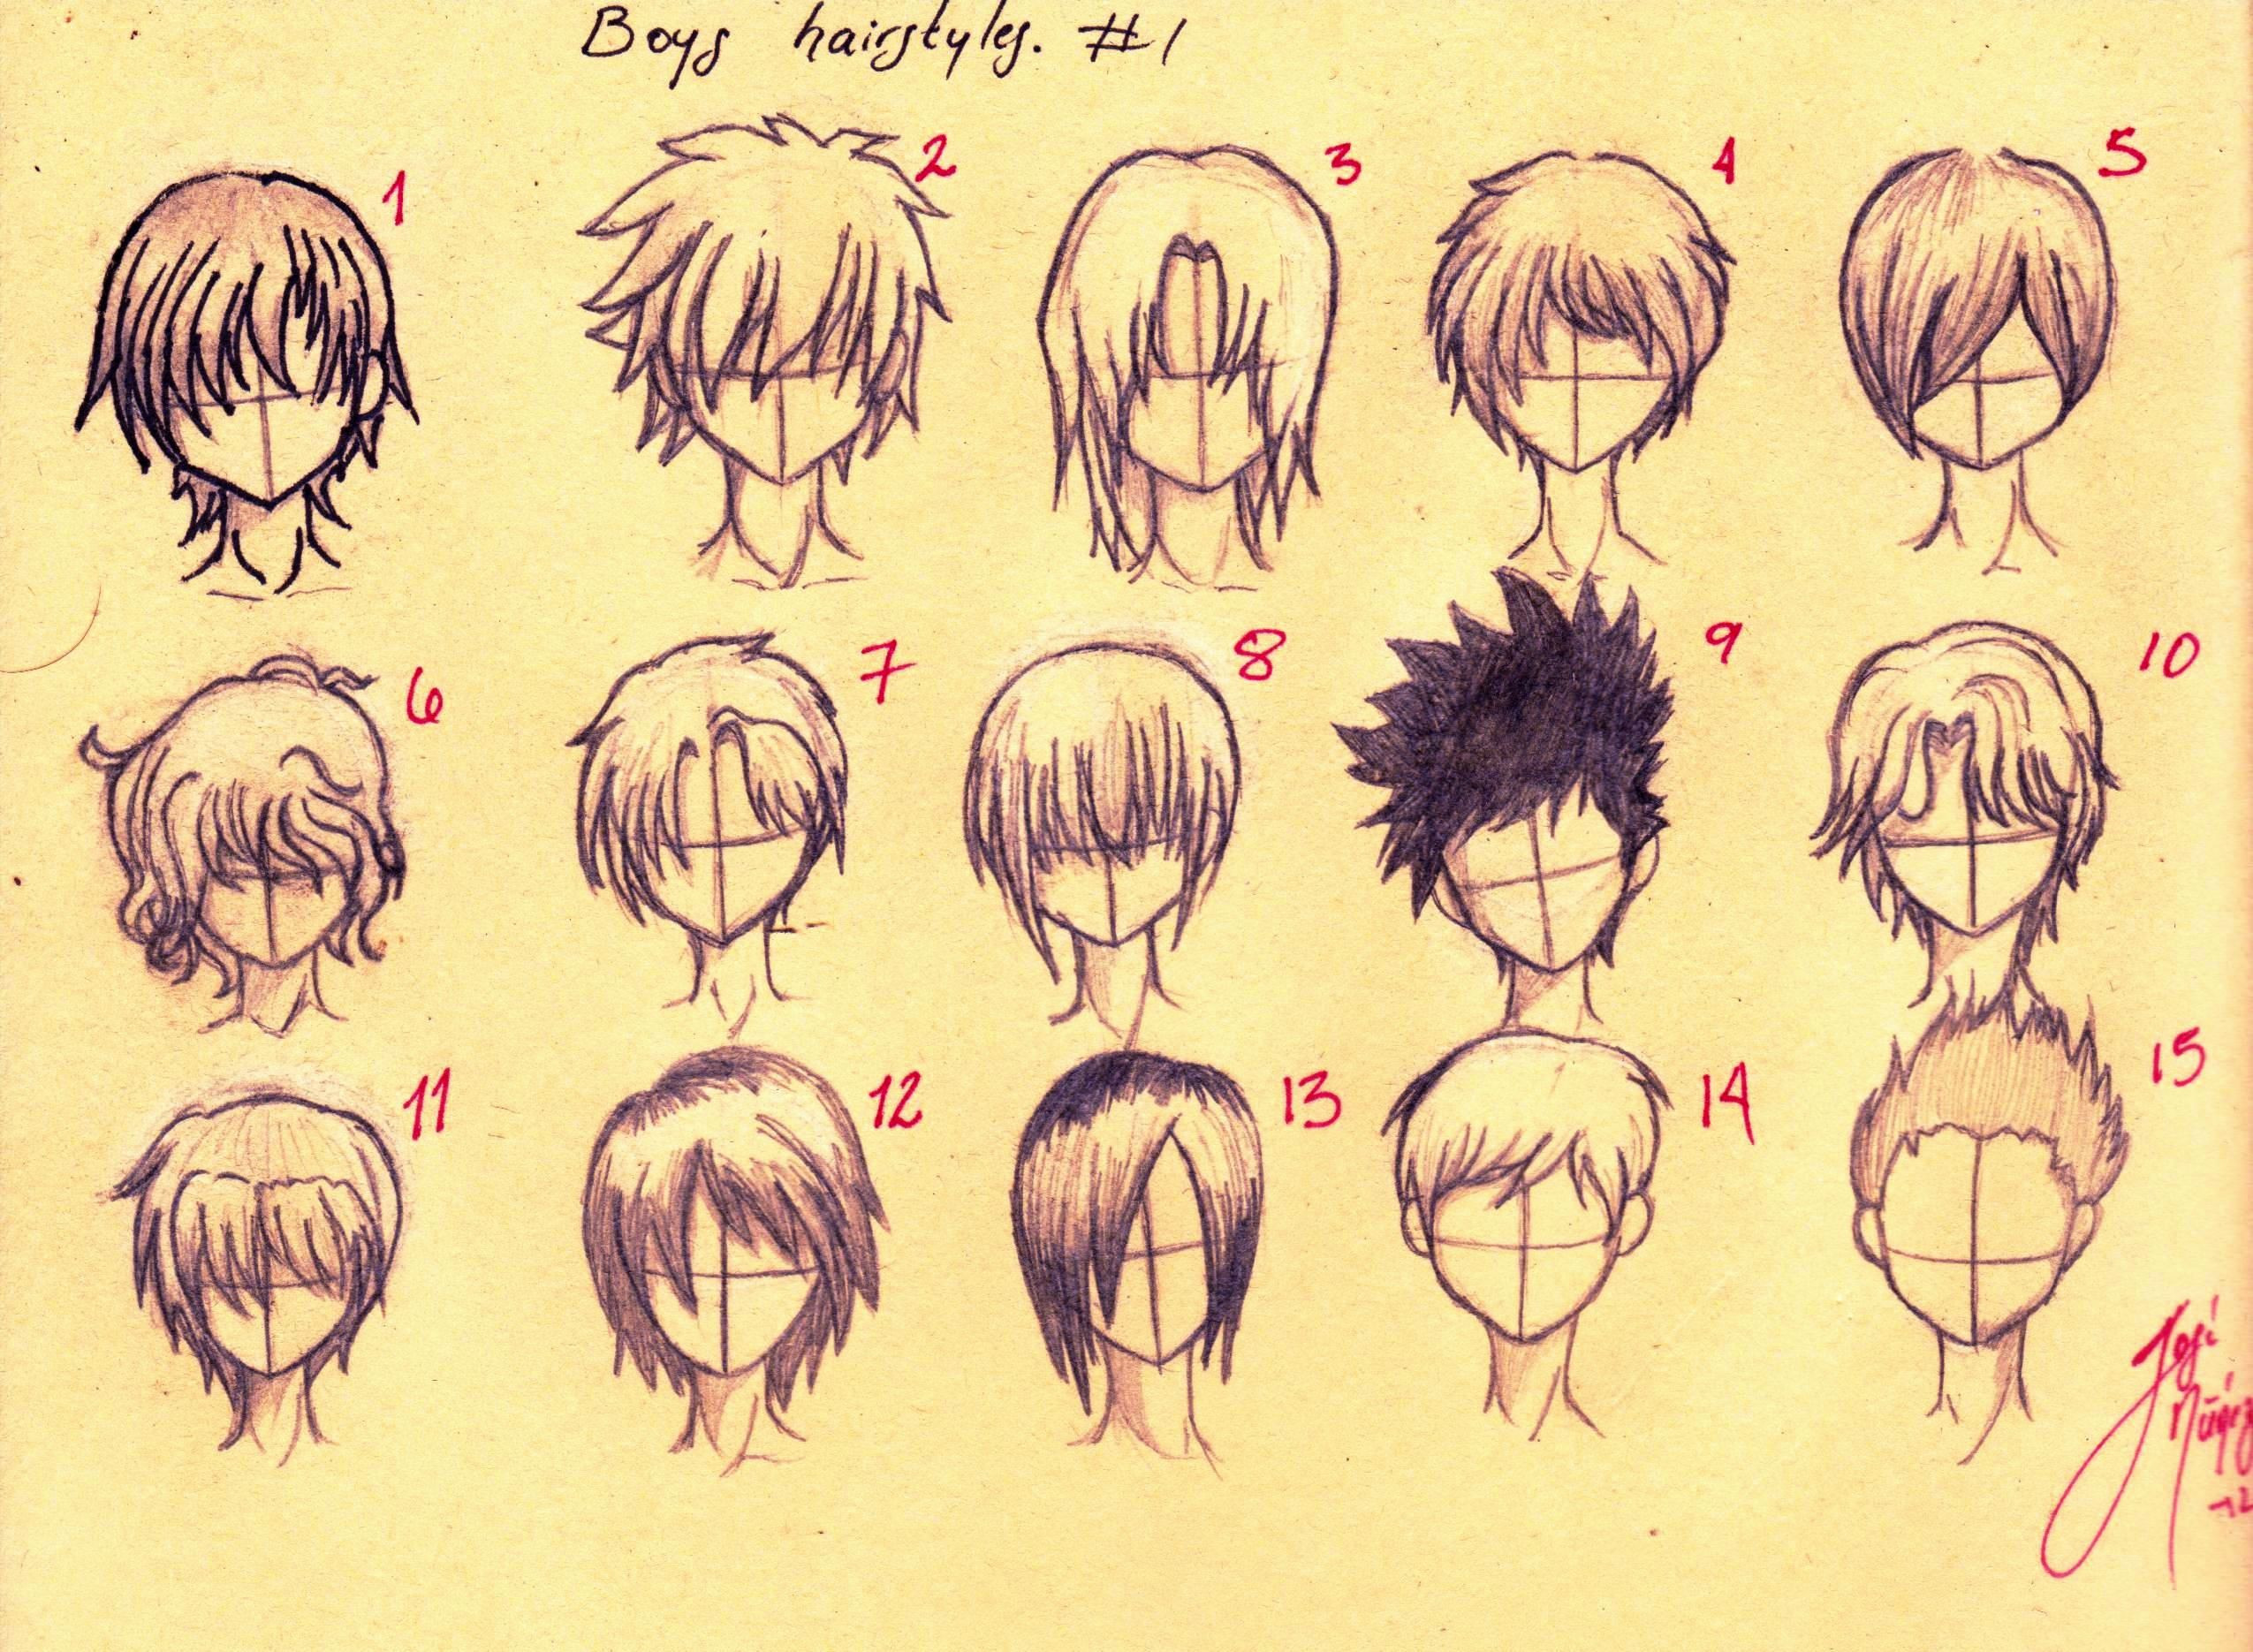 Cute Anime Boy Hairstyles
 Anime Guy Hairstyles Drawing at GetDrawings